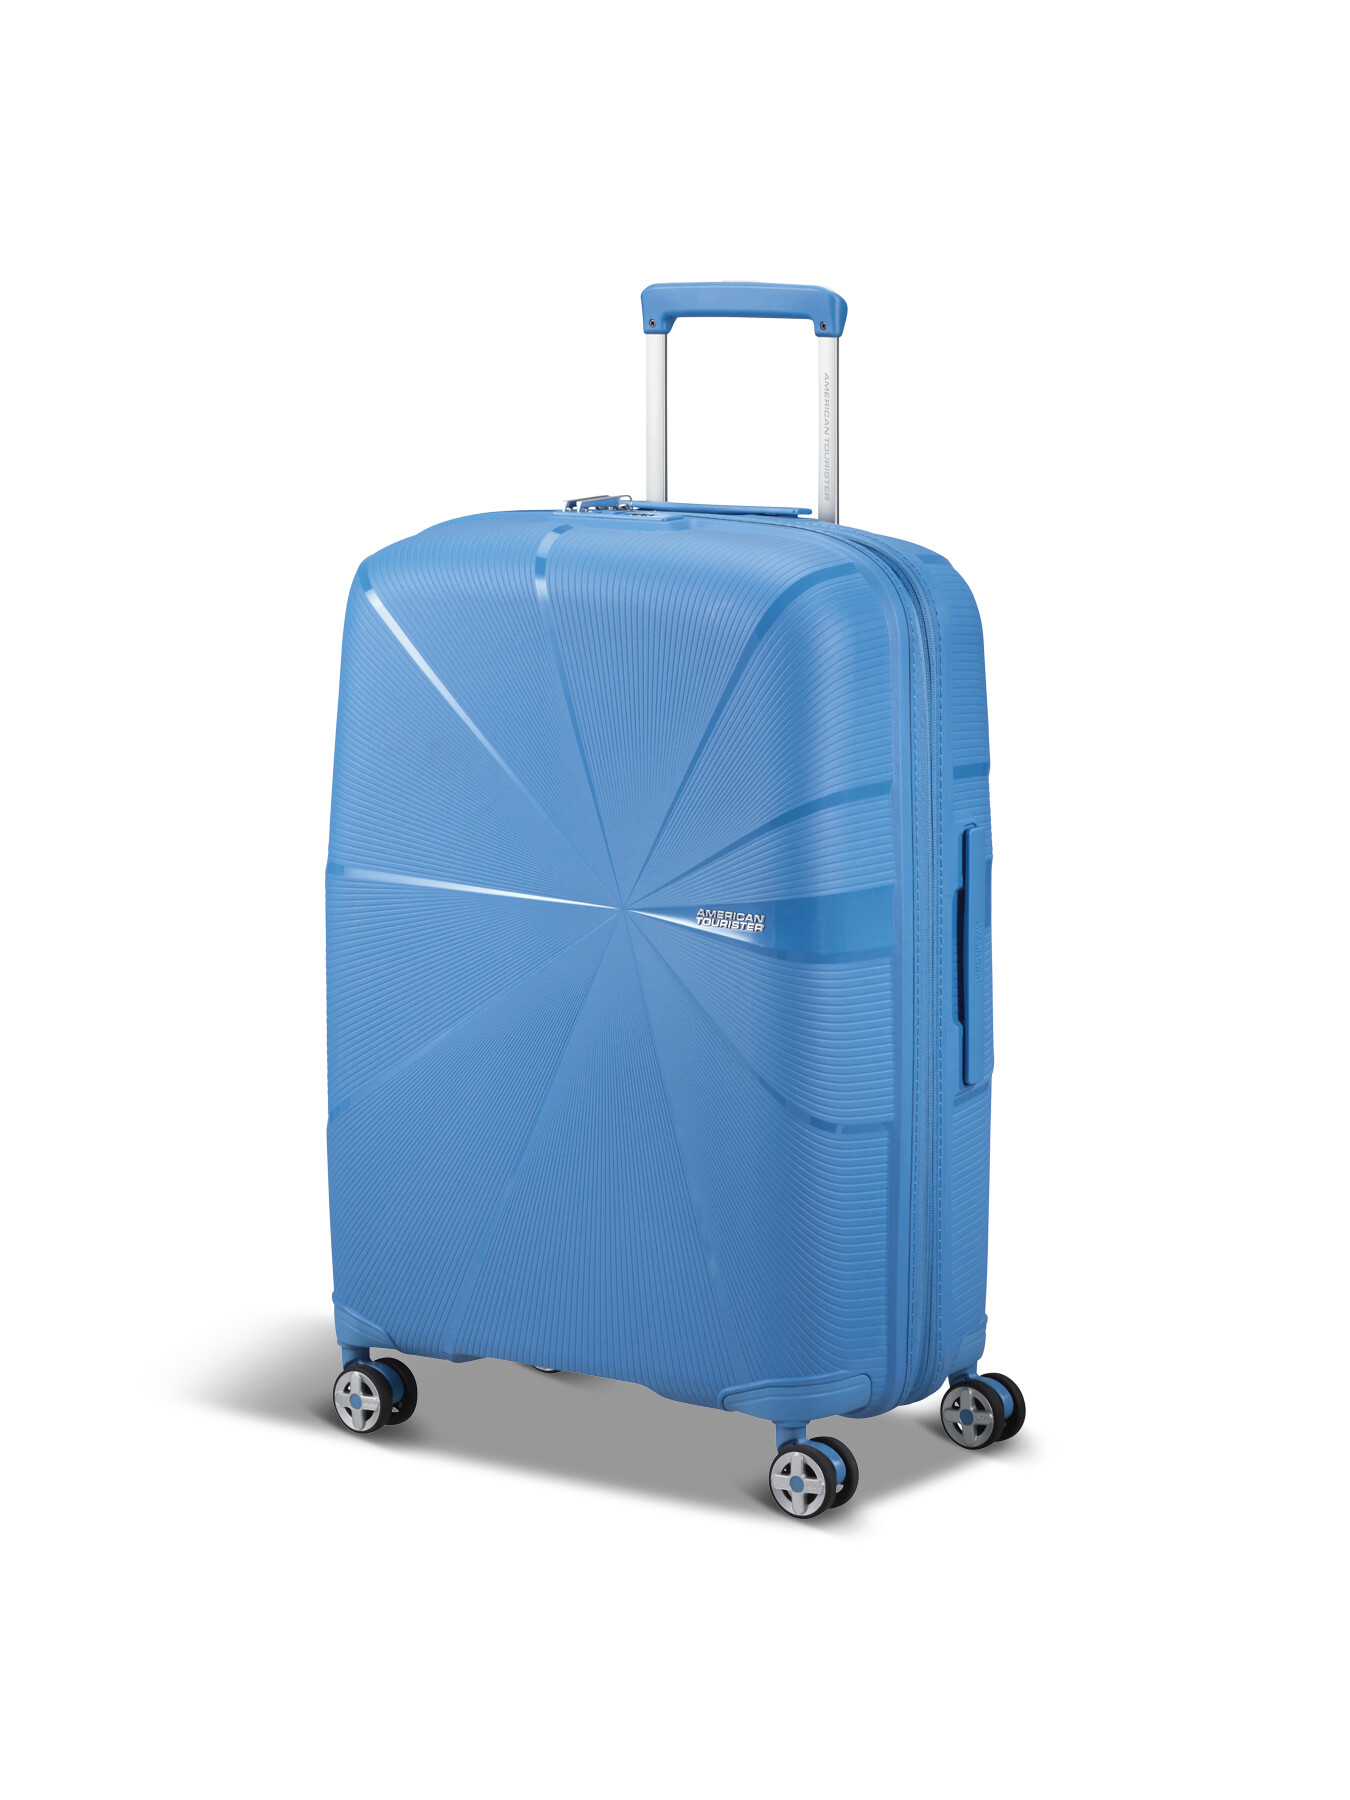 American Tourister Starvibe Spinner 4 wheel 67cm expandable tranquil blue  suitcase | Fenwick